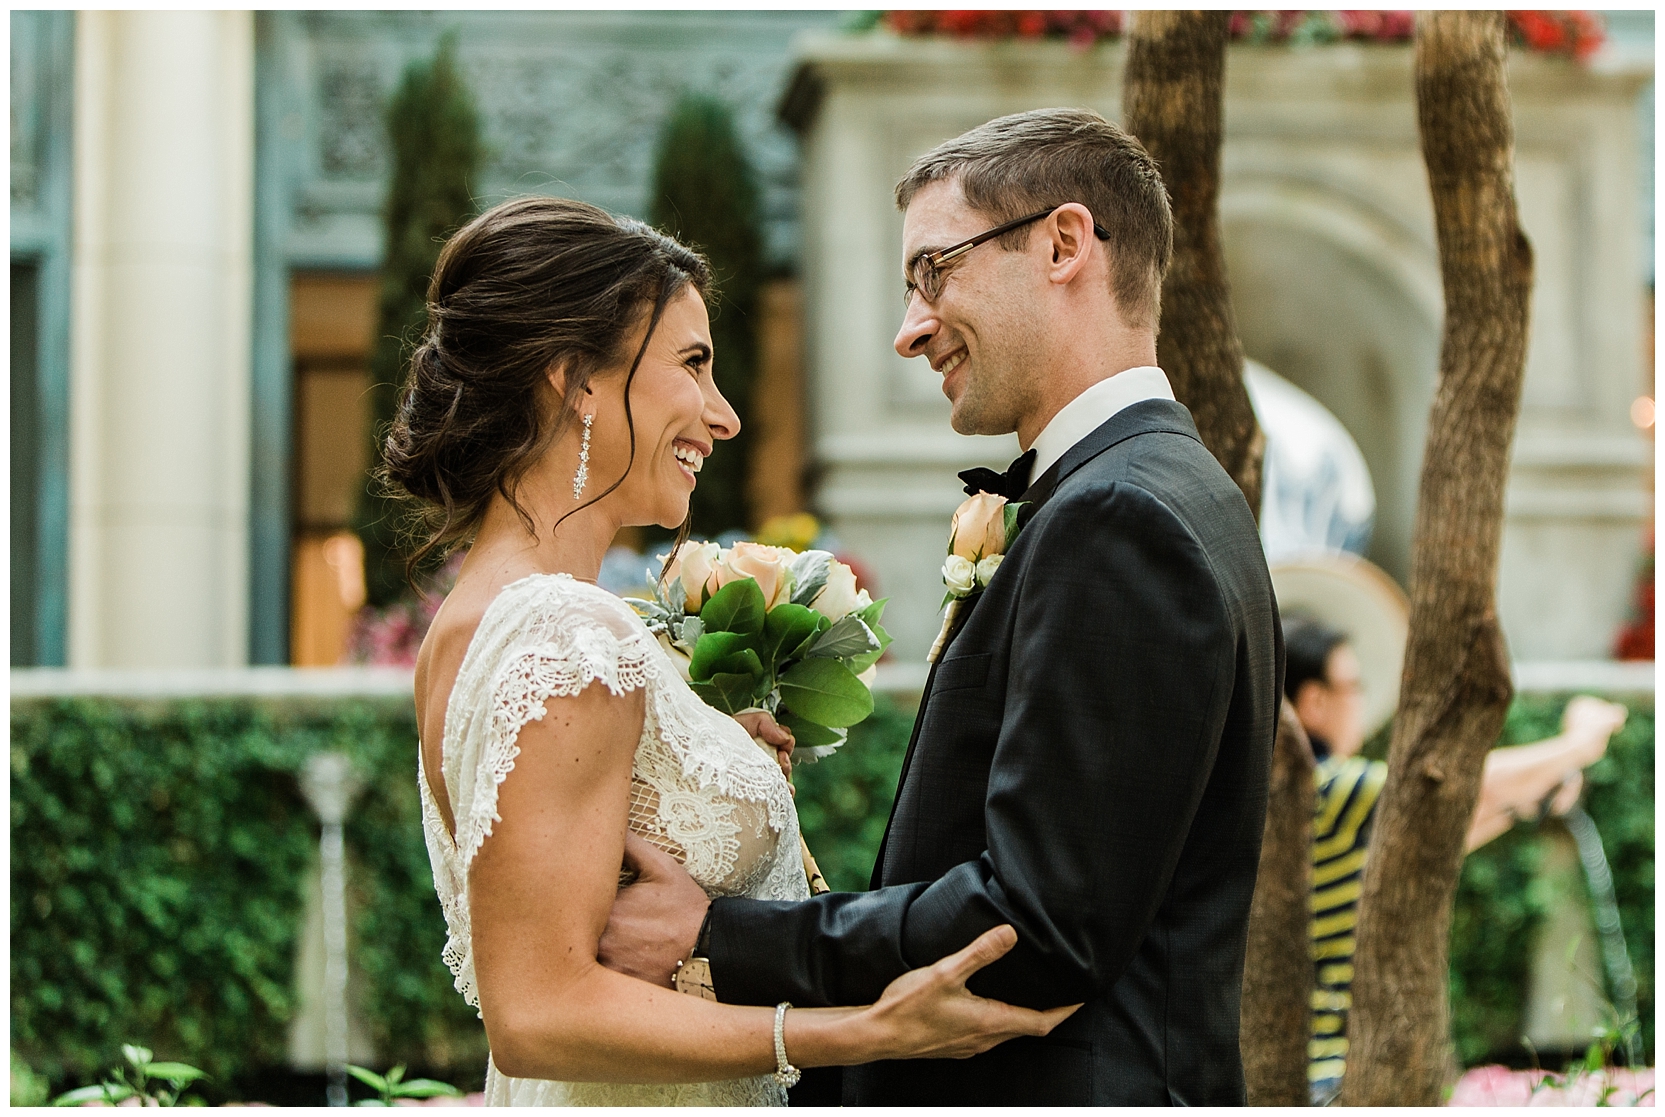 Las Vegas Elopement at the Bellagio photo by Lindsey Ramdin, L.A.R. Weddings